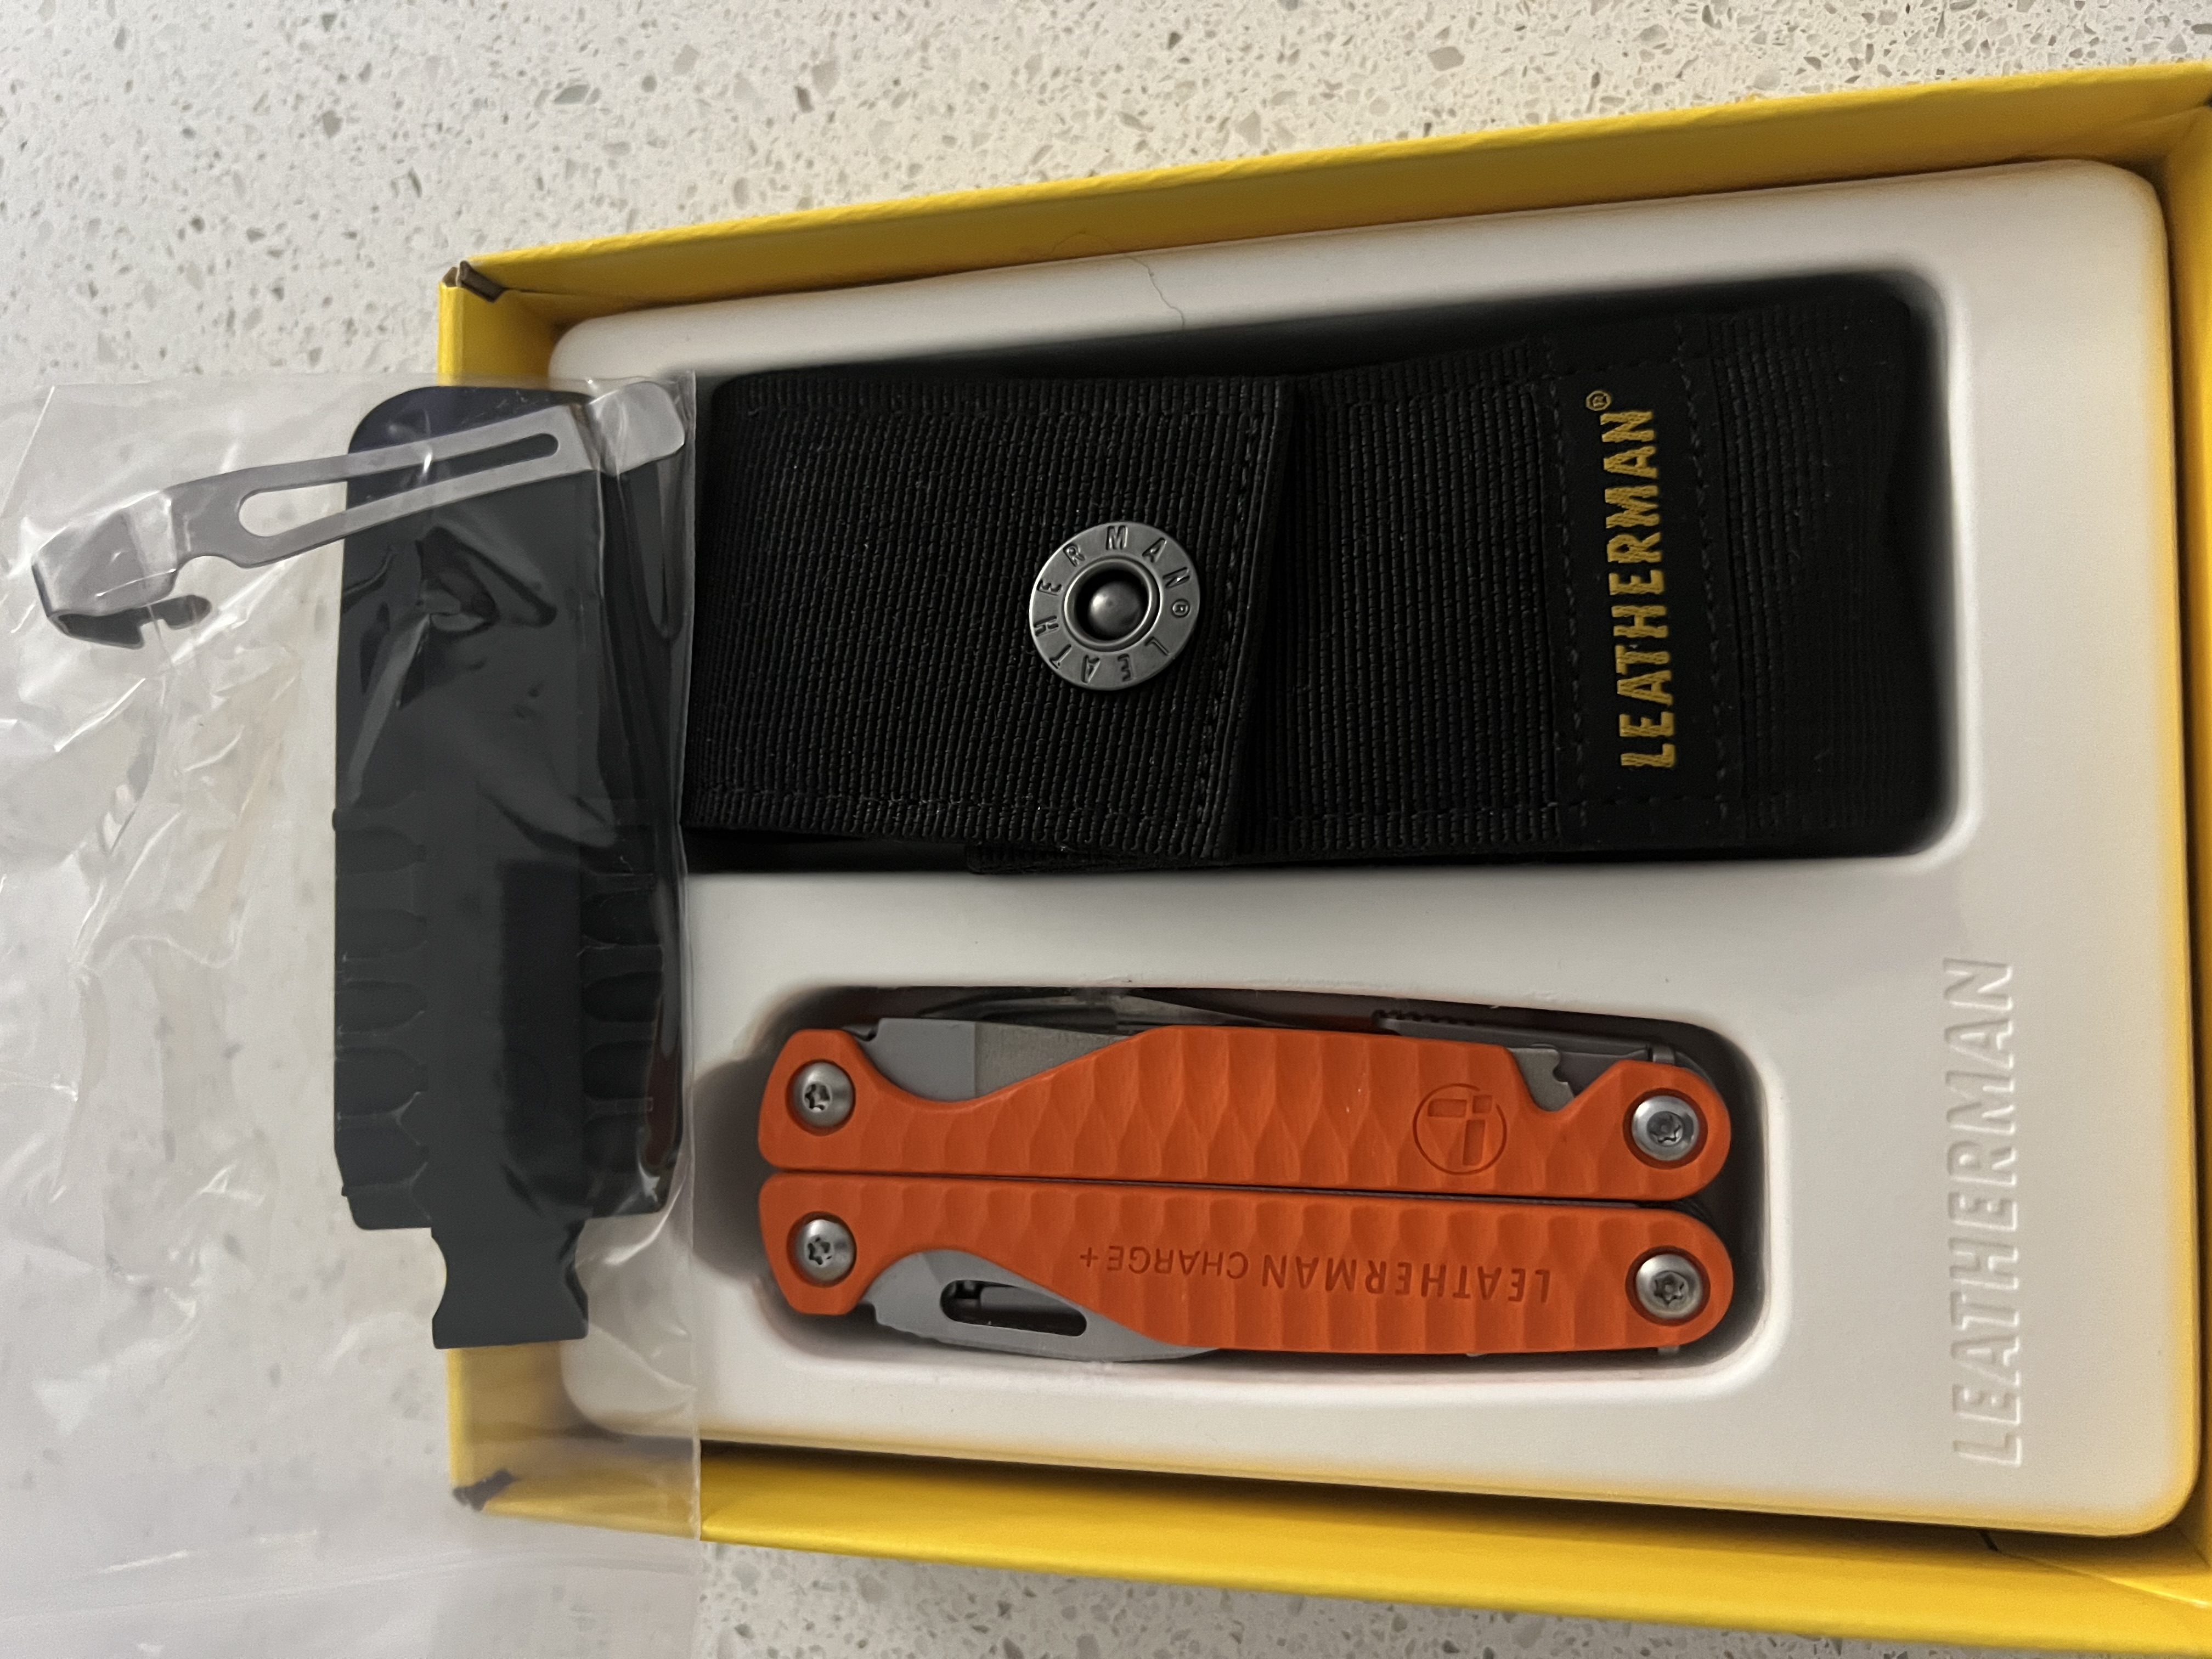 Leatherman Charge G10